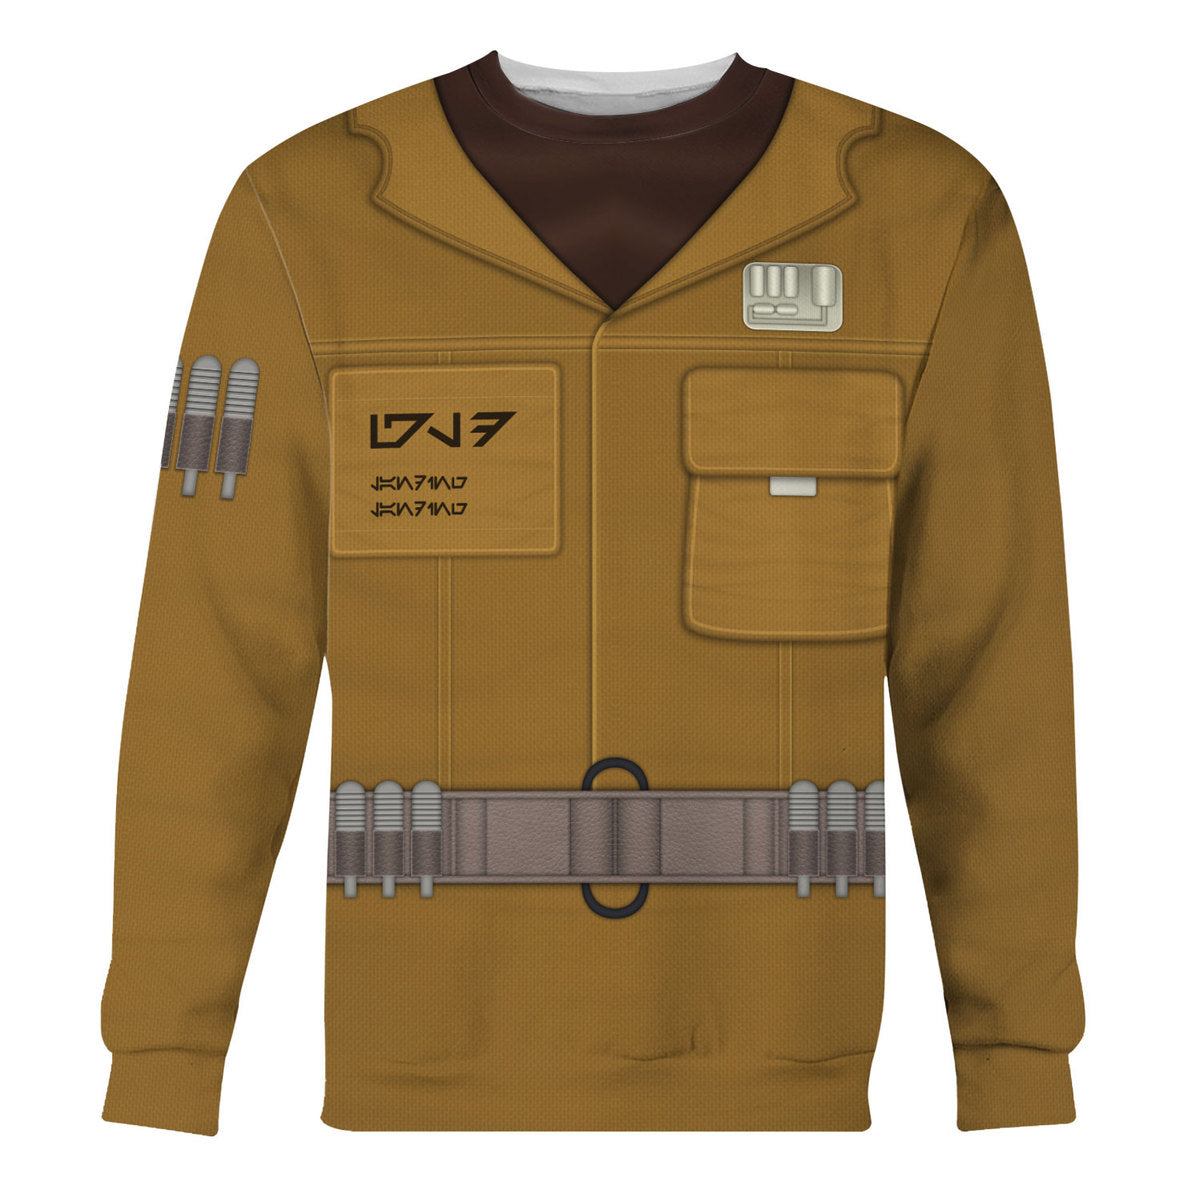 Star Wars Rose Tico Costume - Sweater - Ugly Christmas Sweater